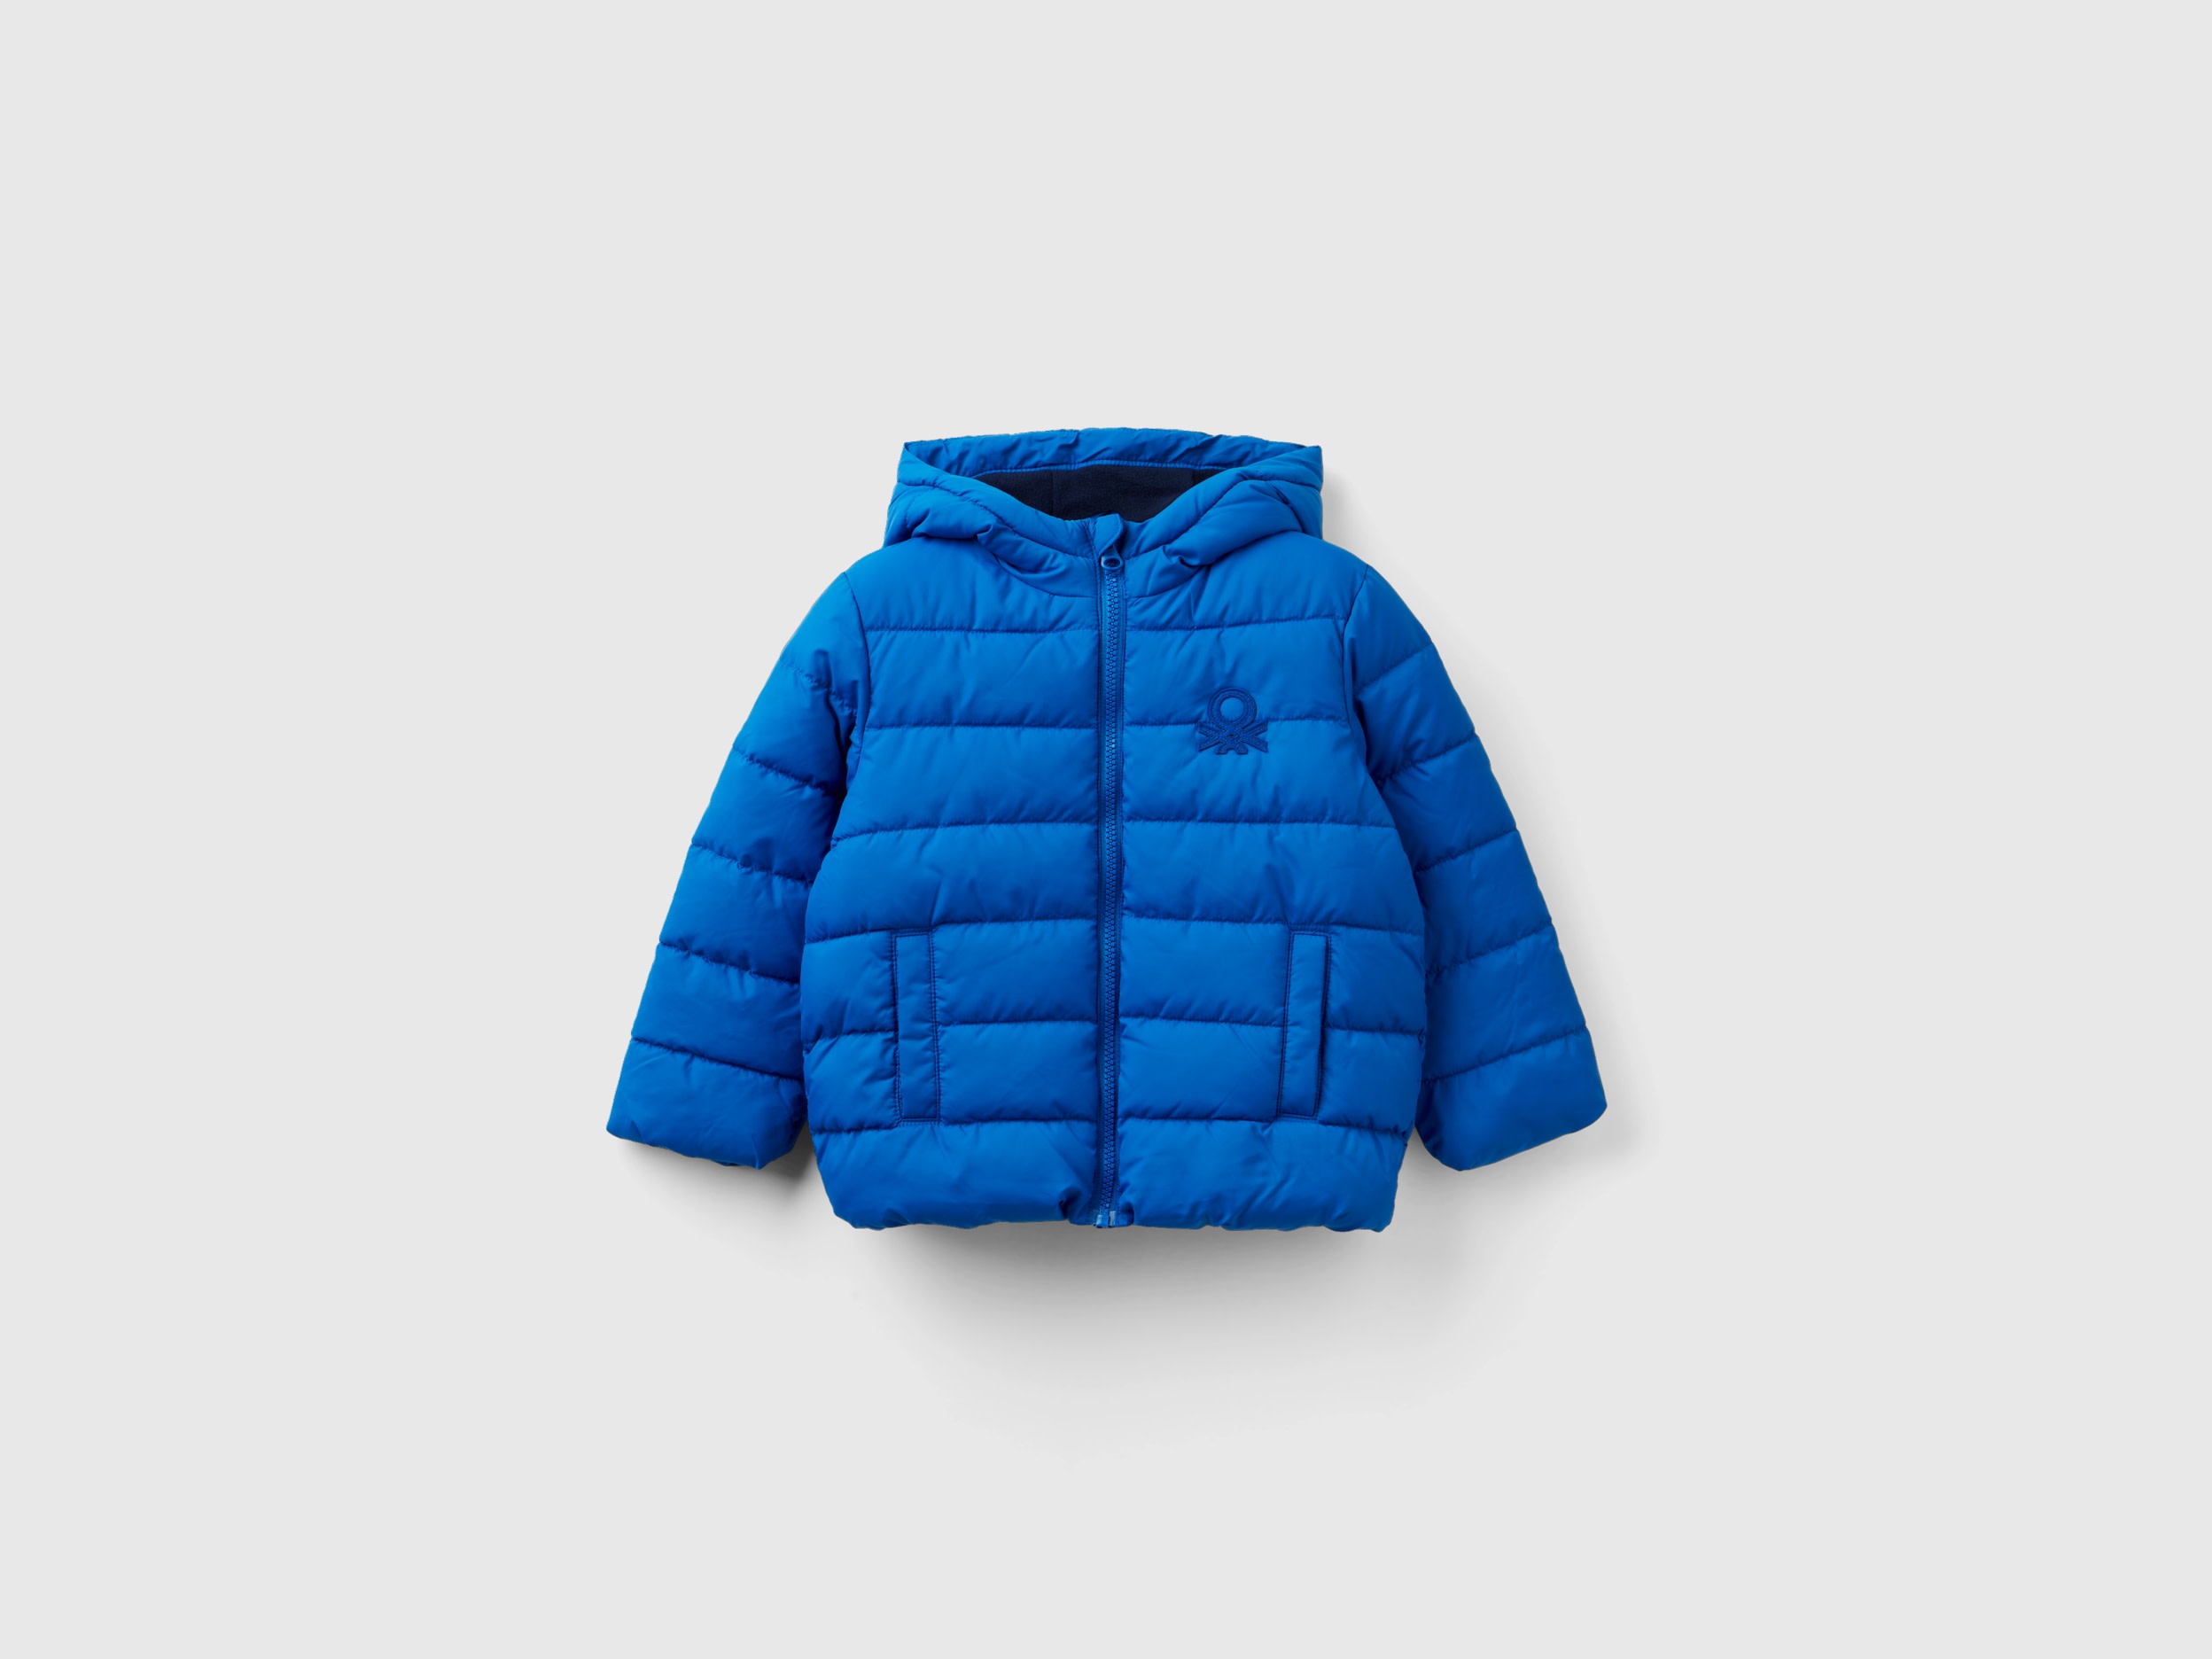 Benetton, Puffer Jacket With Hood And Logo, size 2-3, Bright Blue, Kids